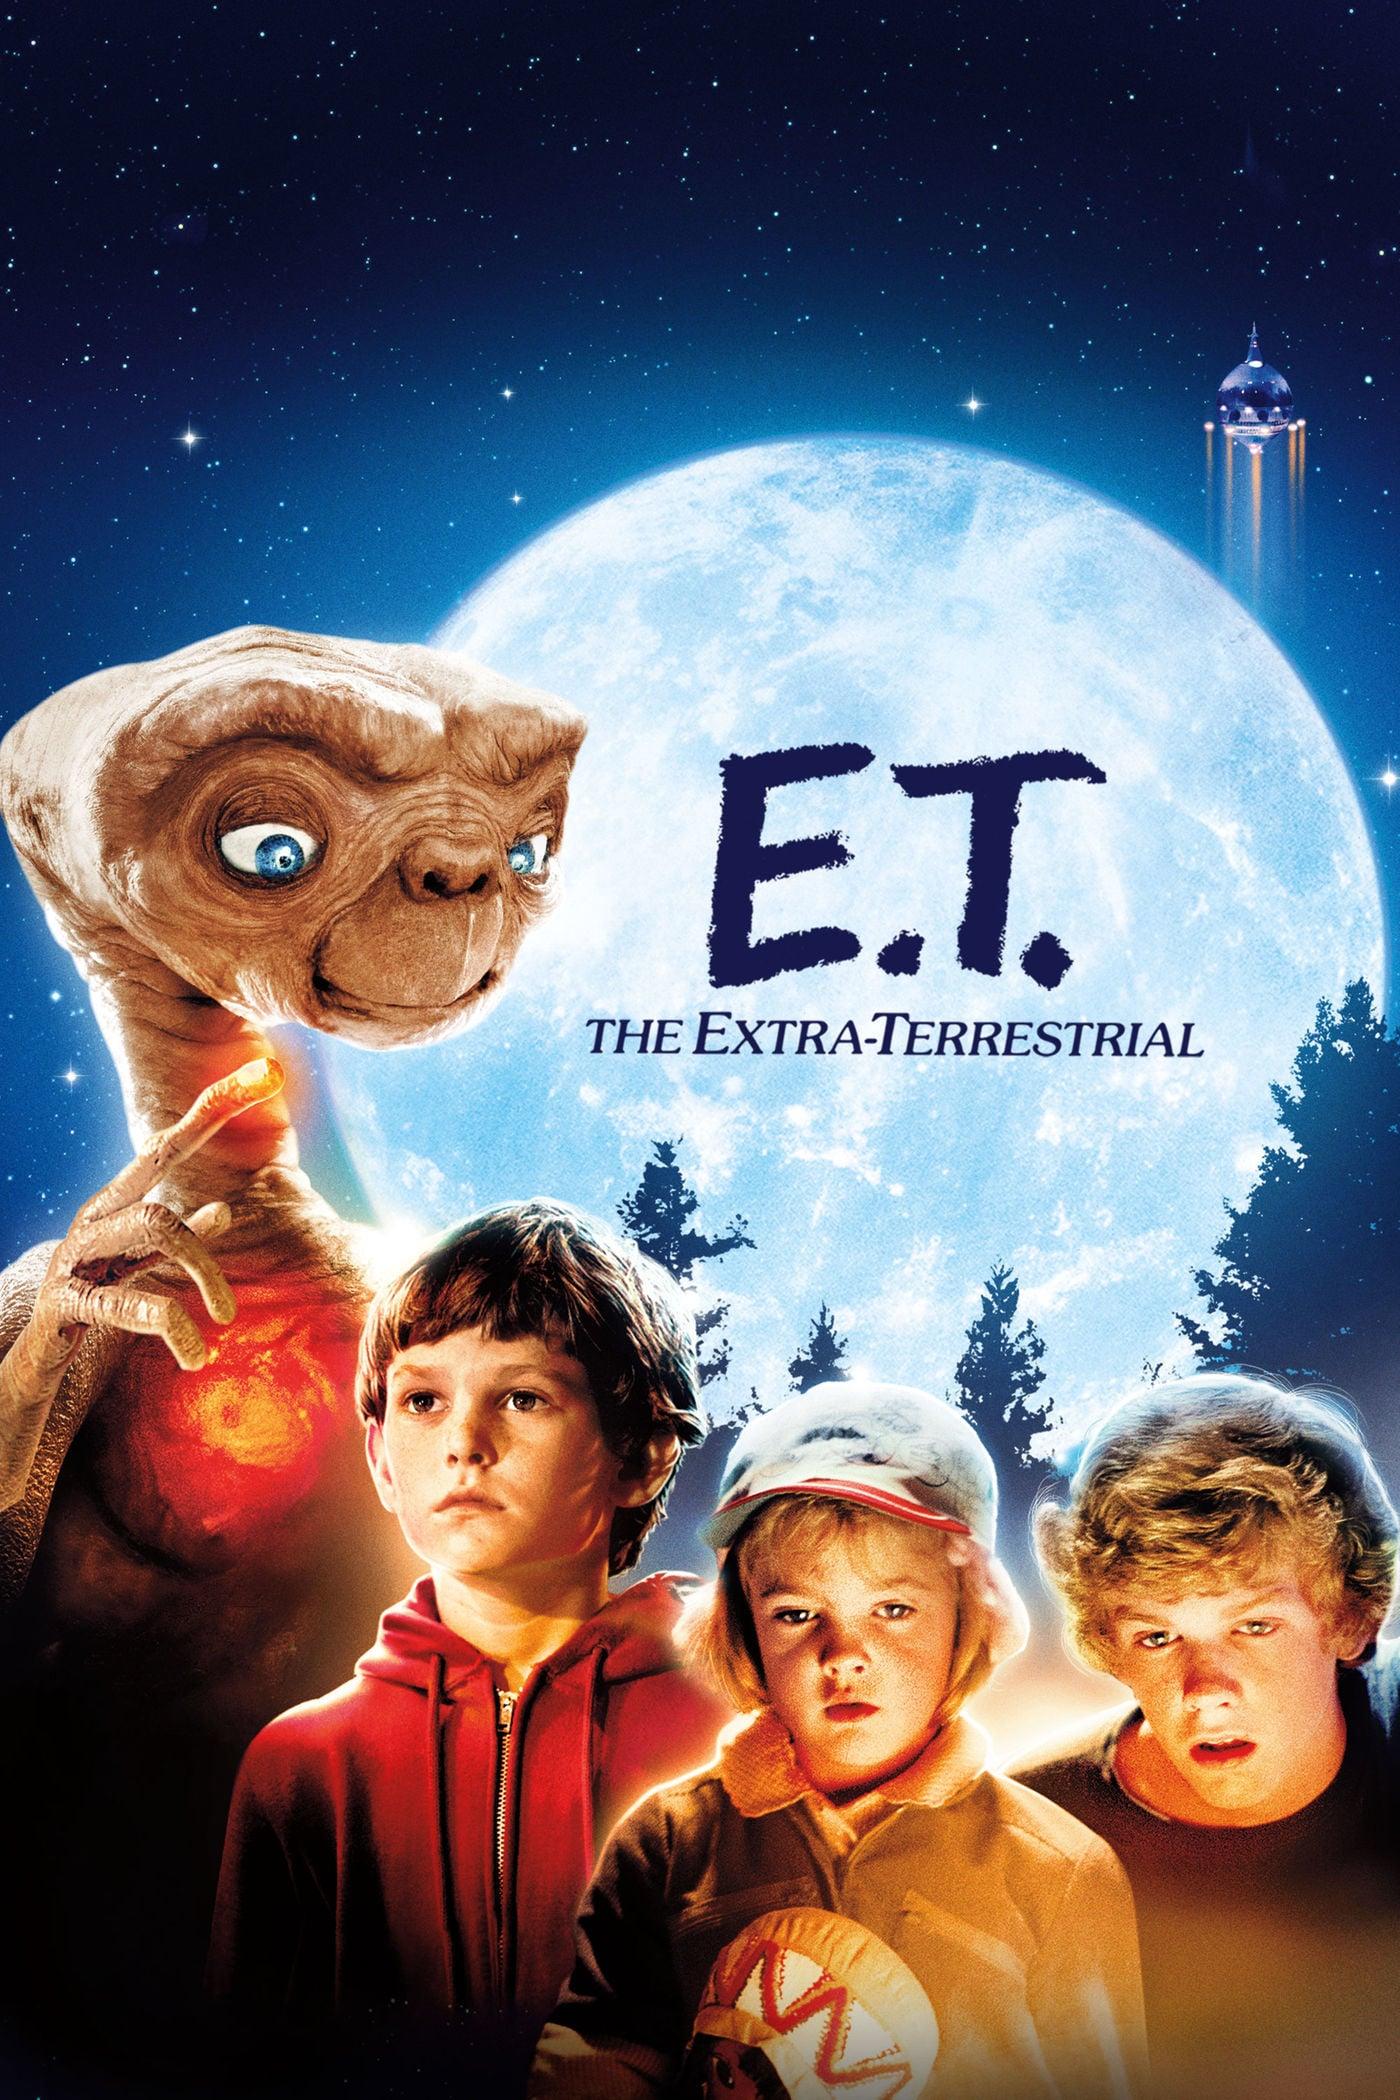 E.T. The Extra Terrestrial Wallpaper High Quality